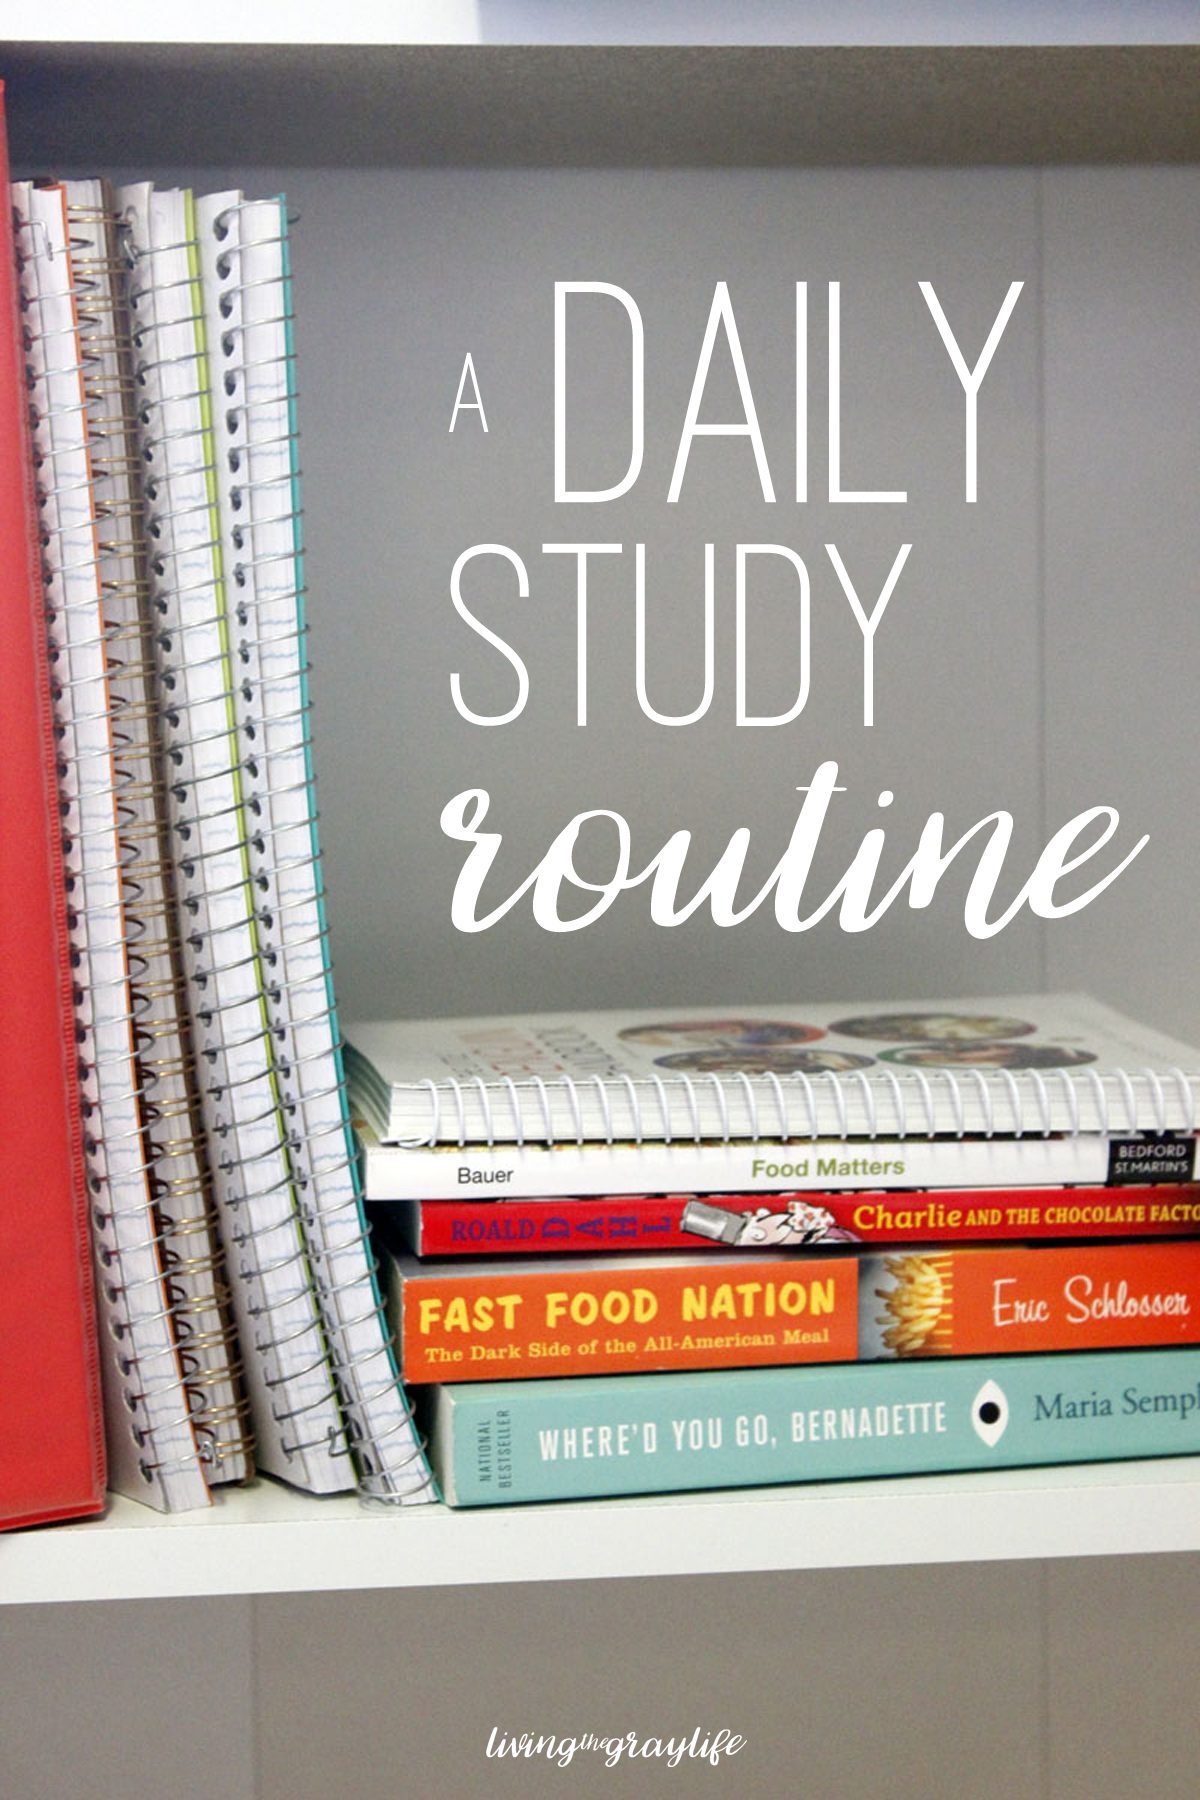 Struggling with finding time for friends and school while in college? Here's a daily study routine that works for me to make those A's and B's!